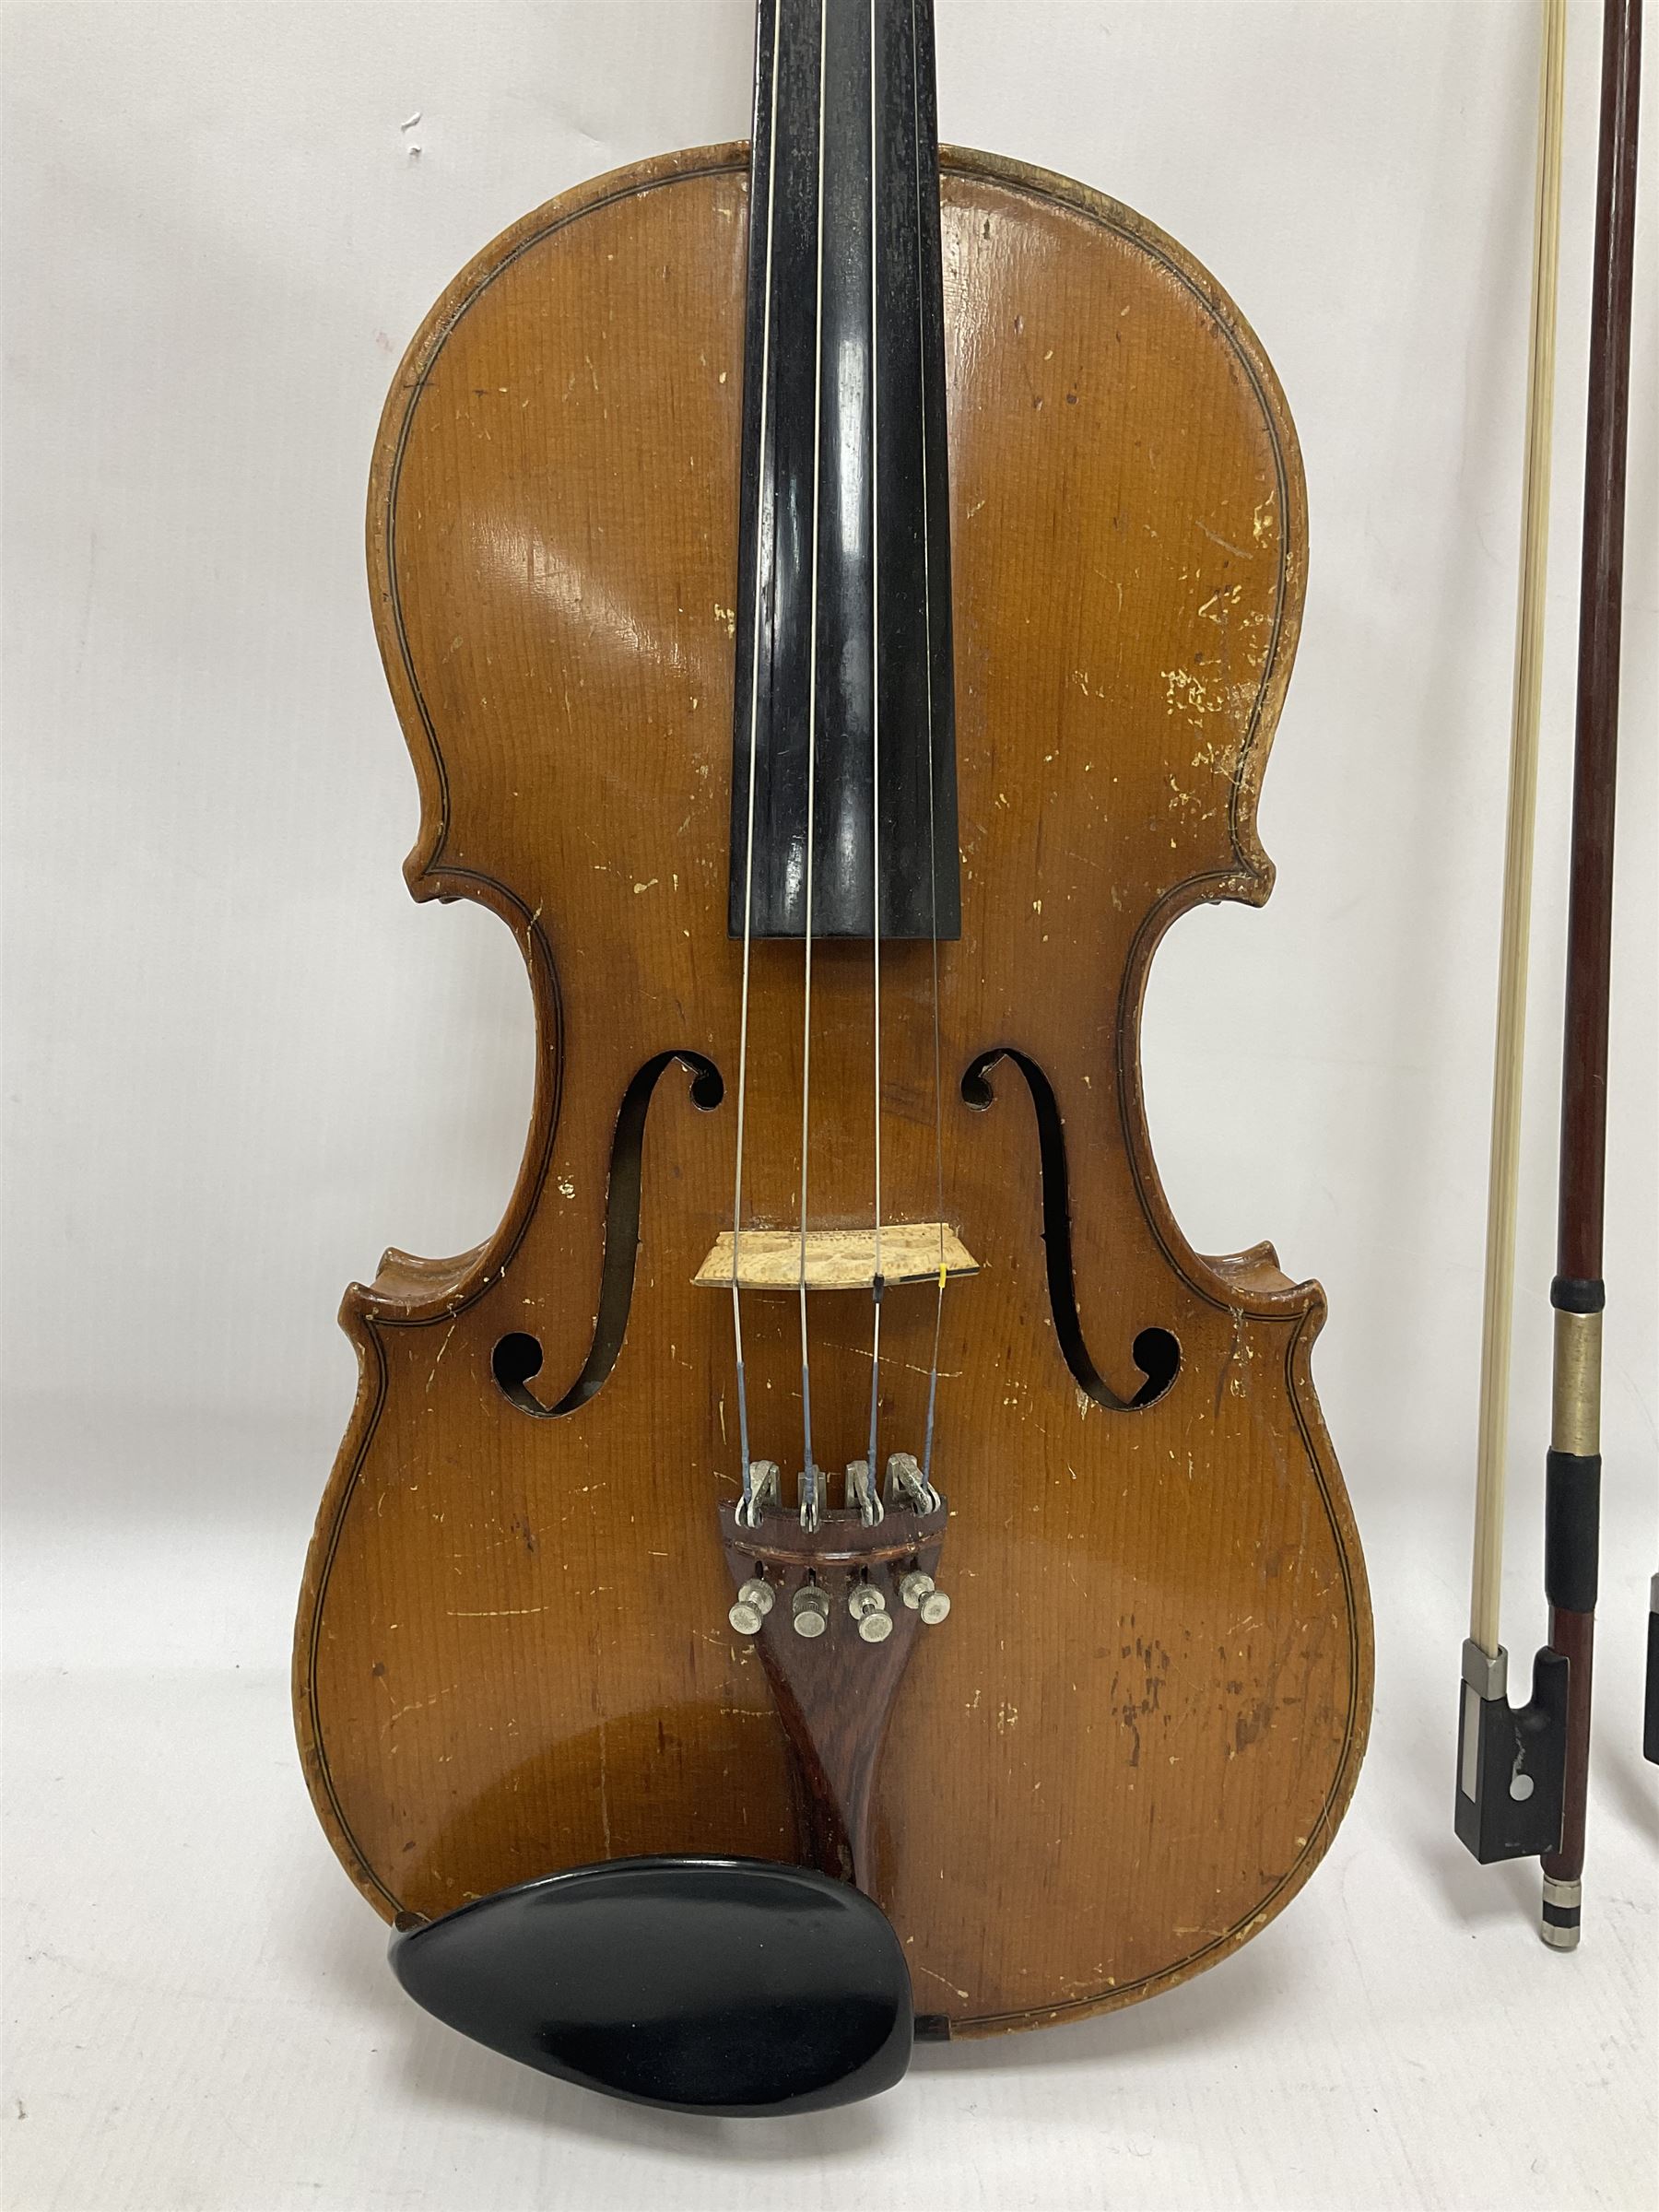 Full size Violin with a maple back and spruce top - Image 3 of 18